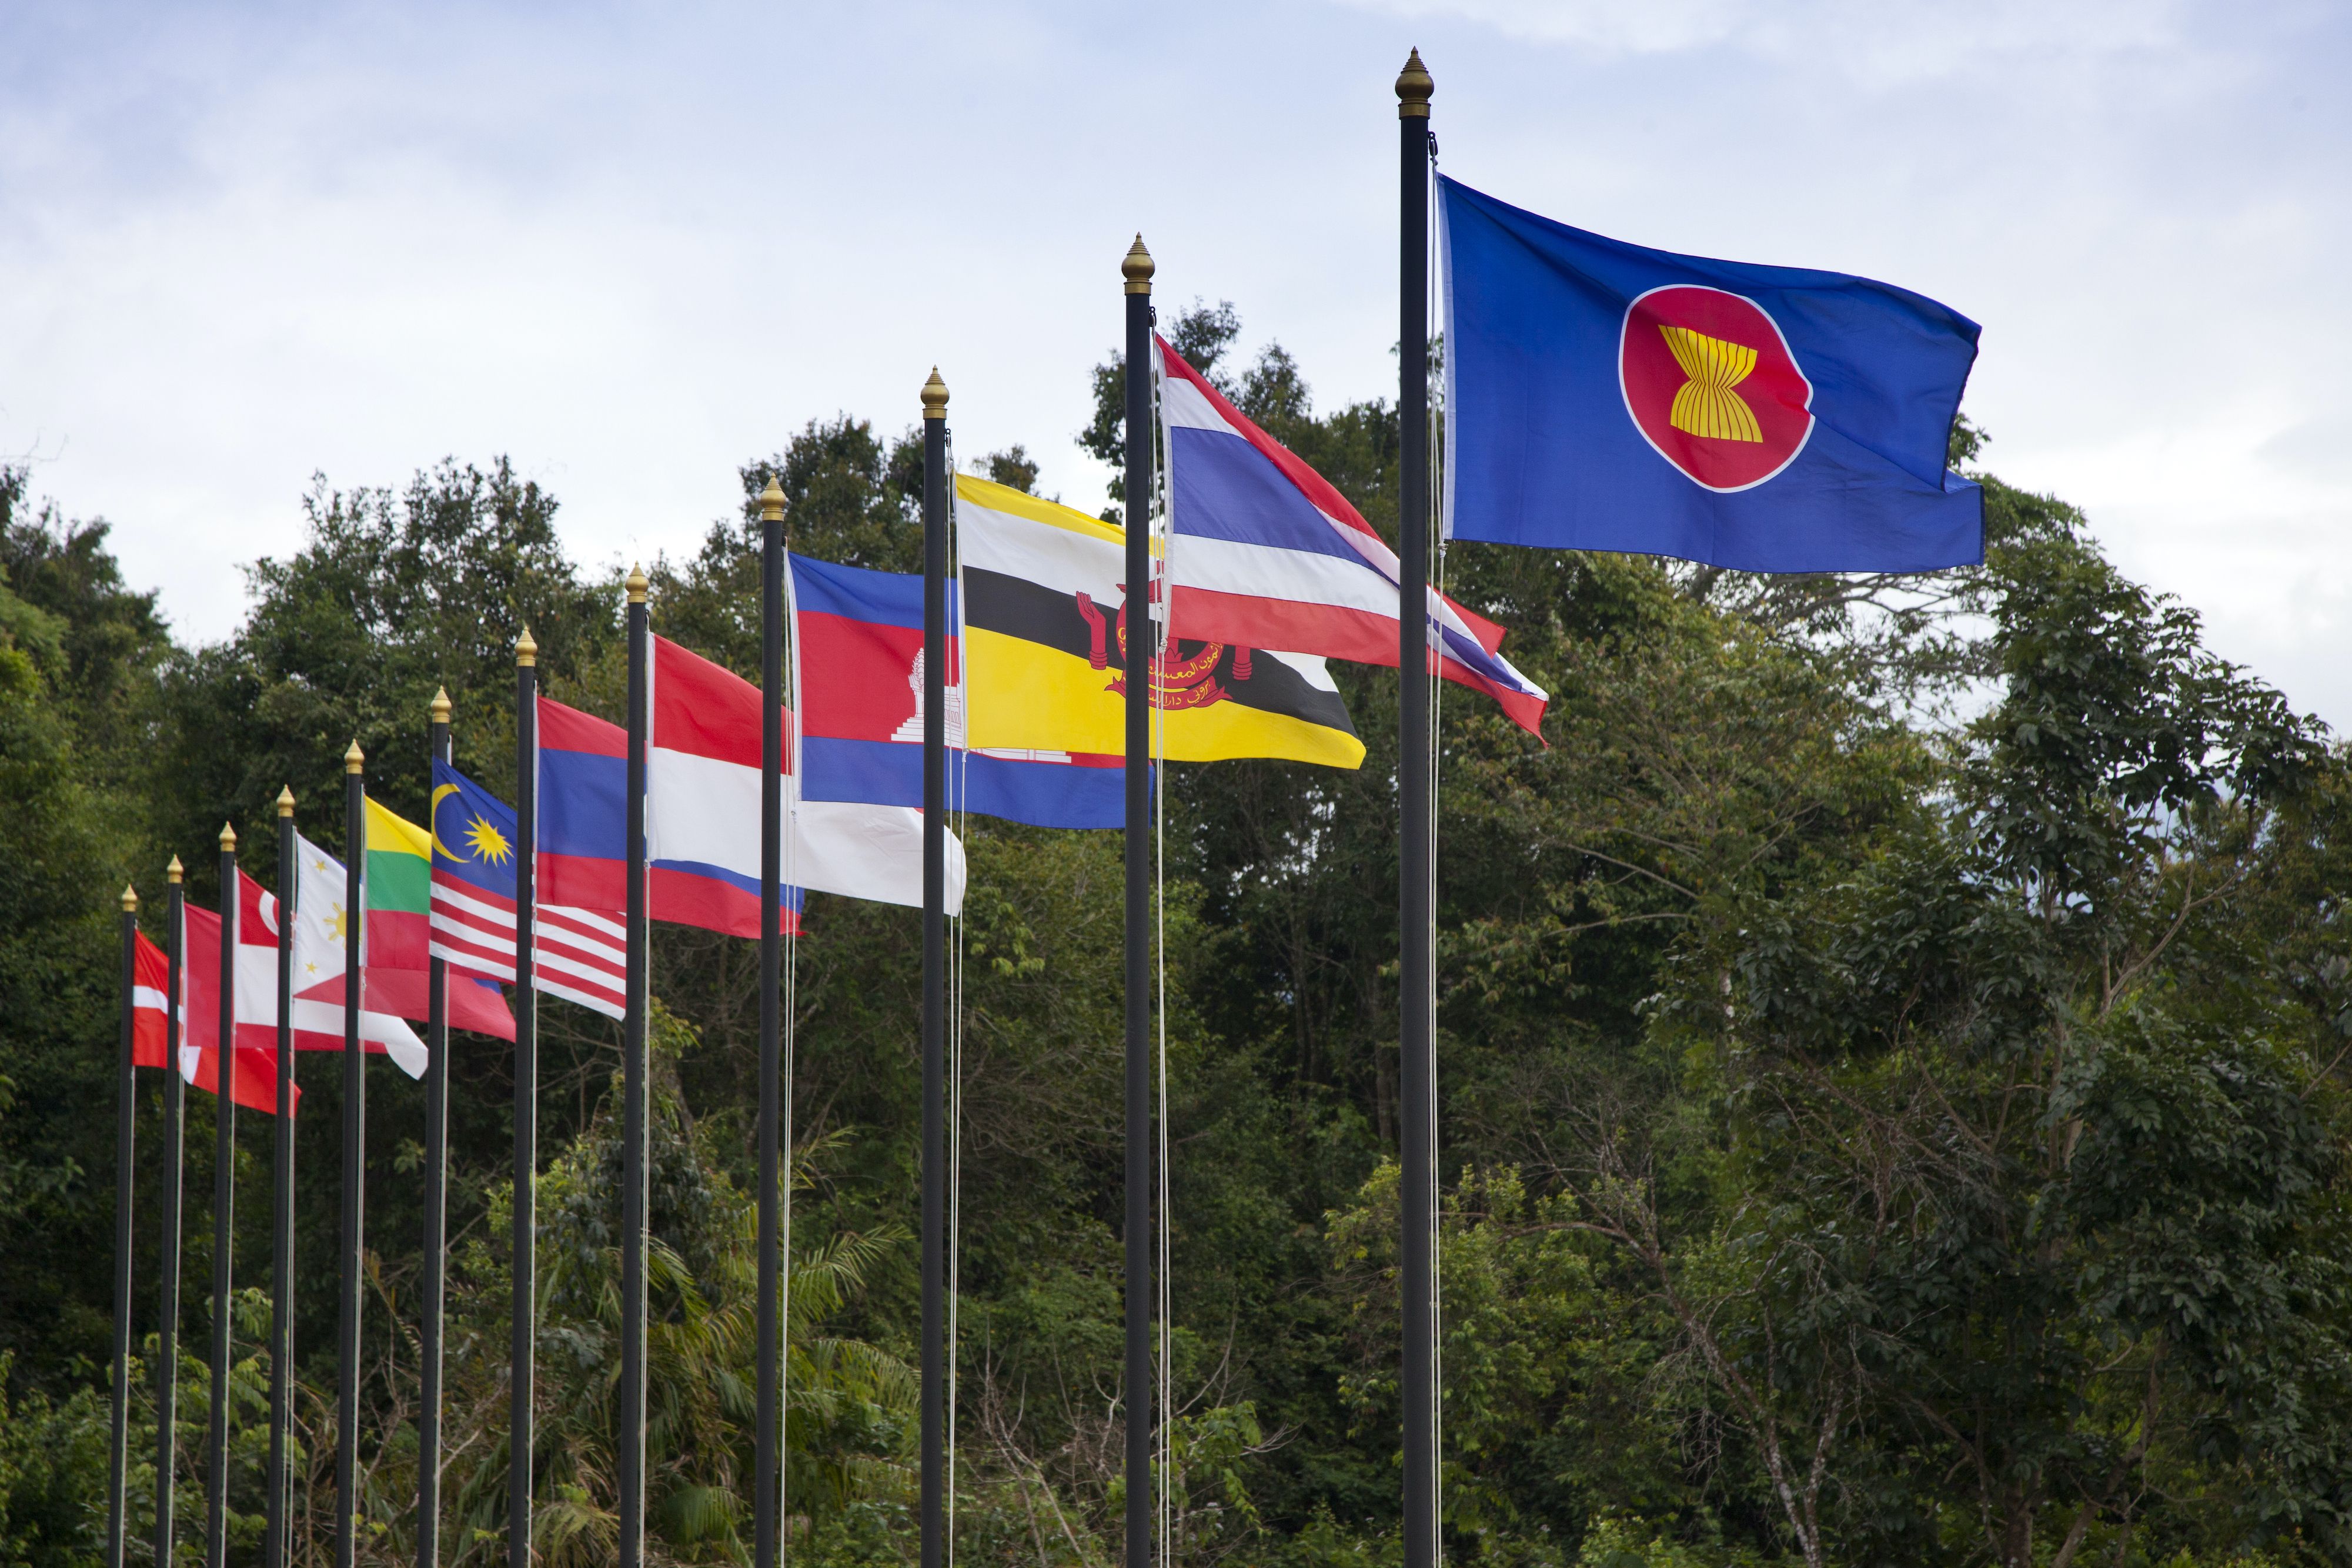 Flags of ASEAN countries. Image by Tawin Mukdharakosa / Shutterstock. Undated.